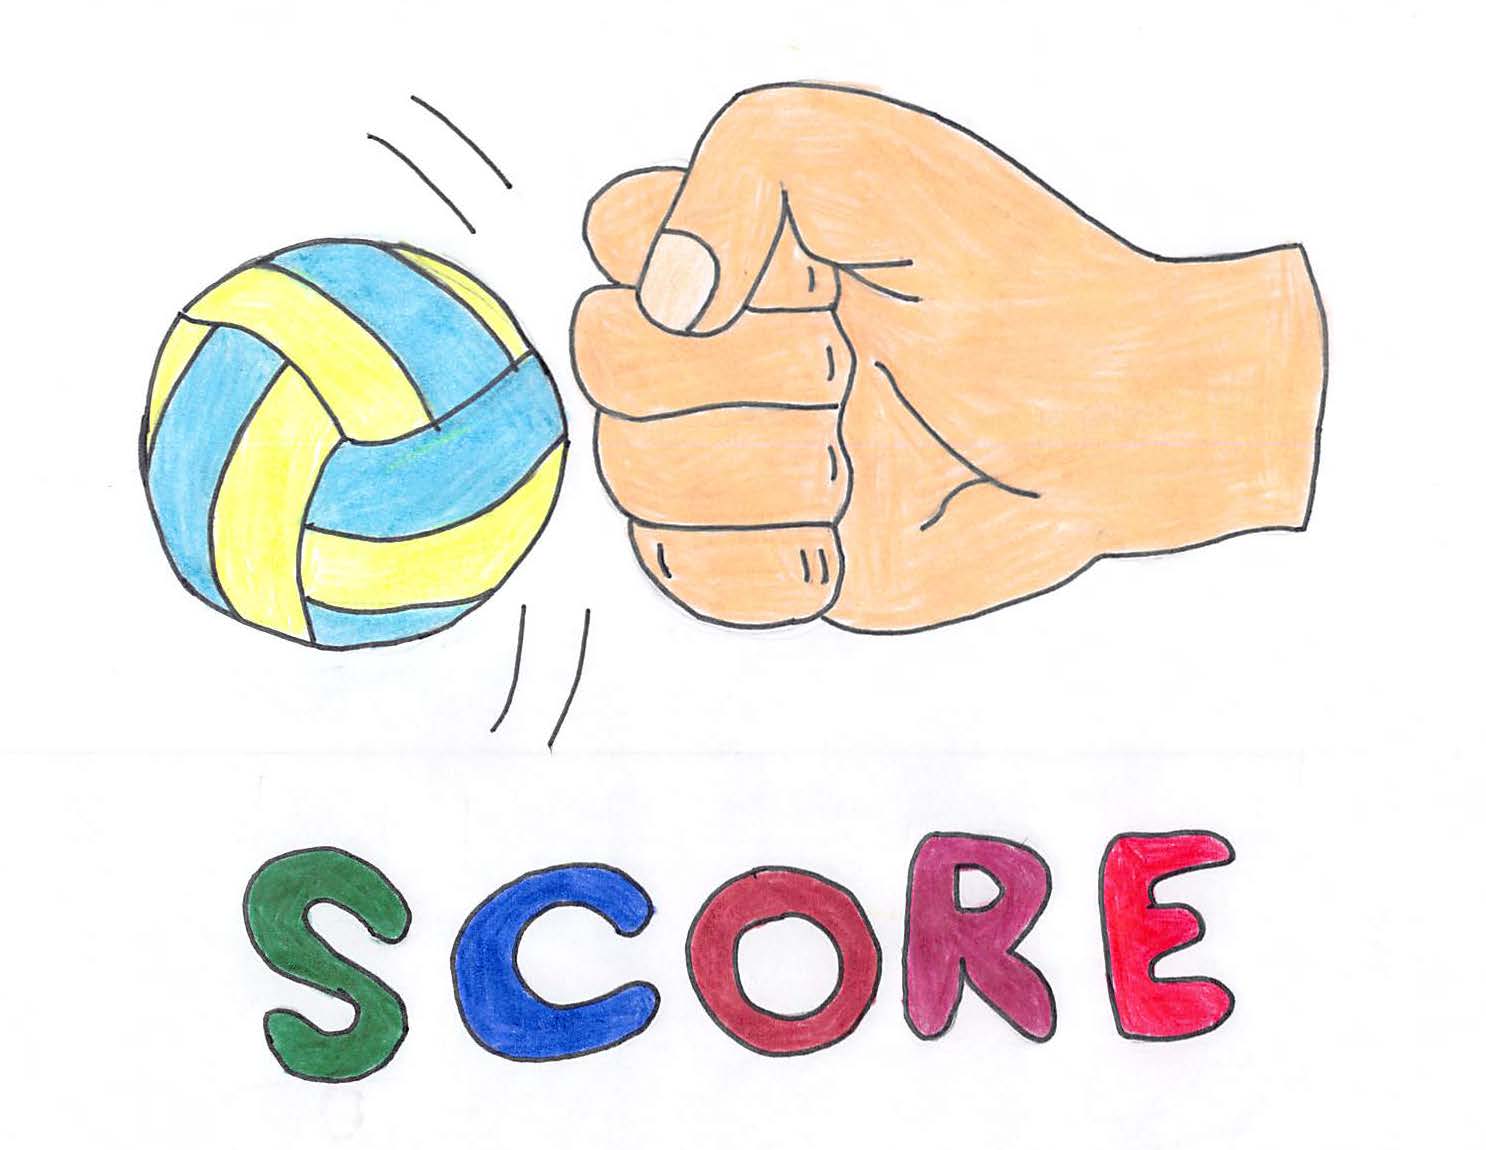 Pencil crayon drawing for the SCORE! logo contest. The drawing includes a hand hitting a volleyball.